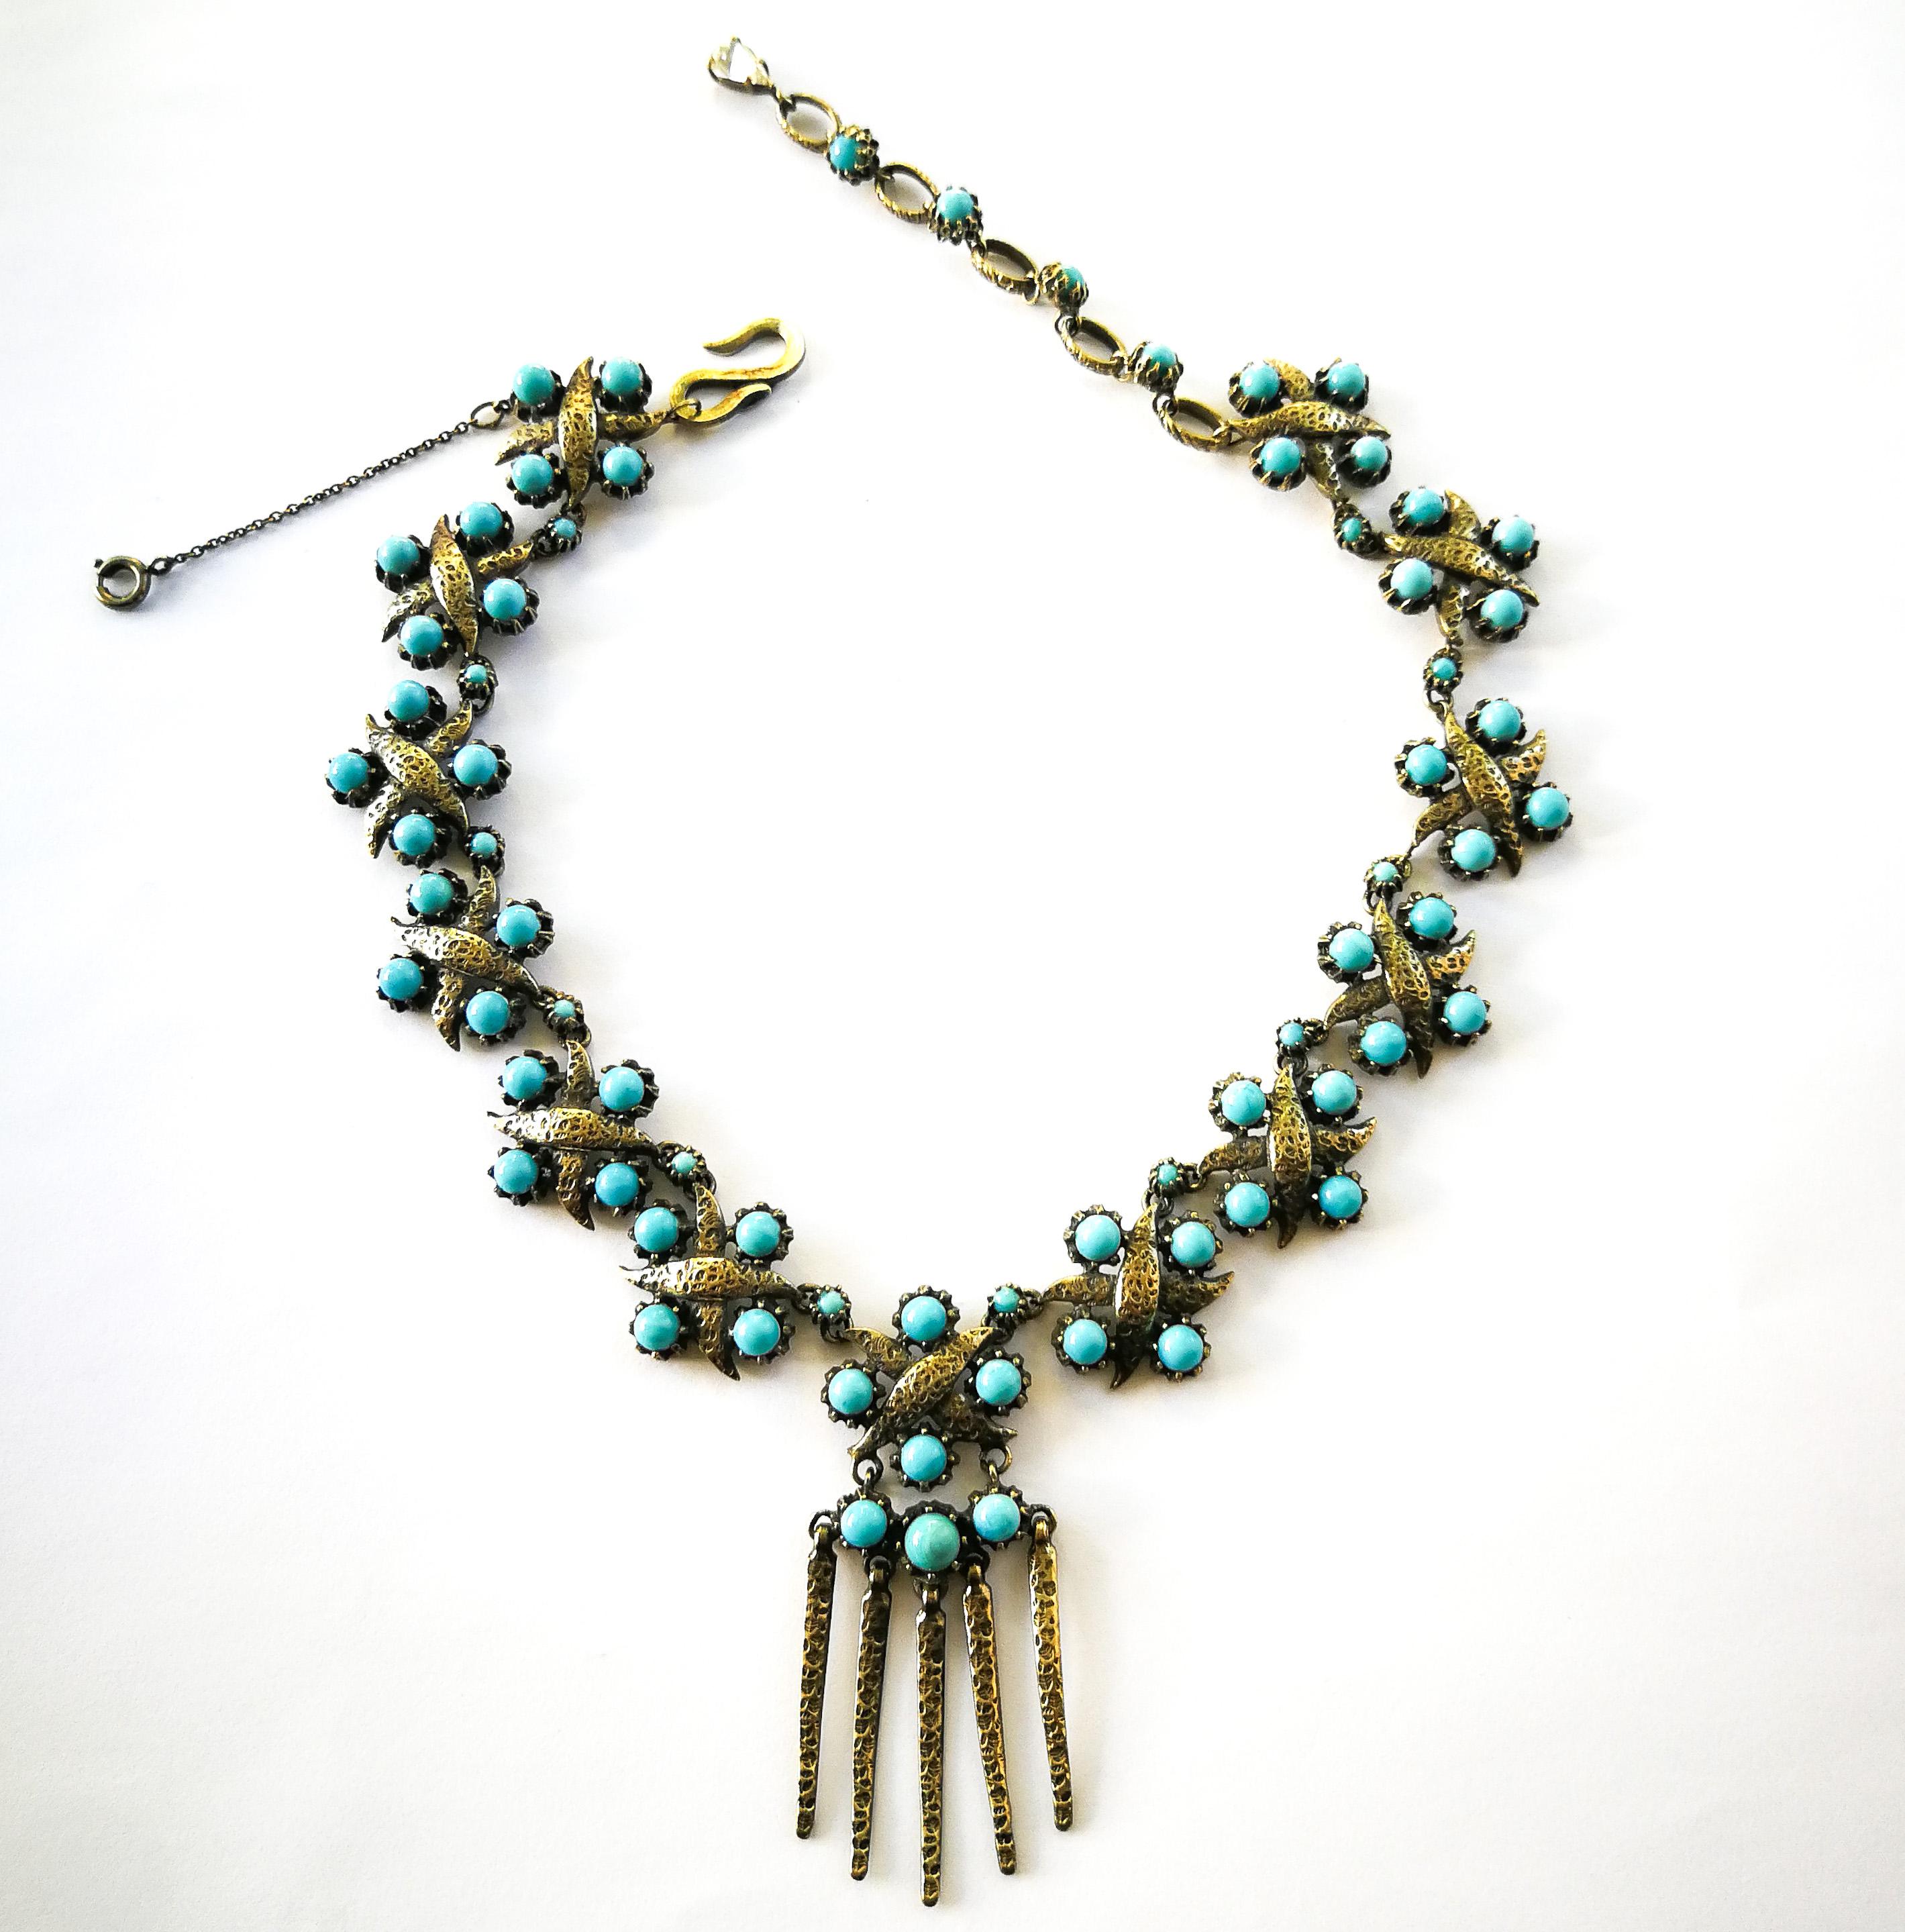 A charming necklace from Mitchel Maer for Christian Dior, in the early 1950s, this hammered gilt metal and turquoise bead necklace is a highly recognisable and iconic design, of the high quality associated with this creator. With reference to